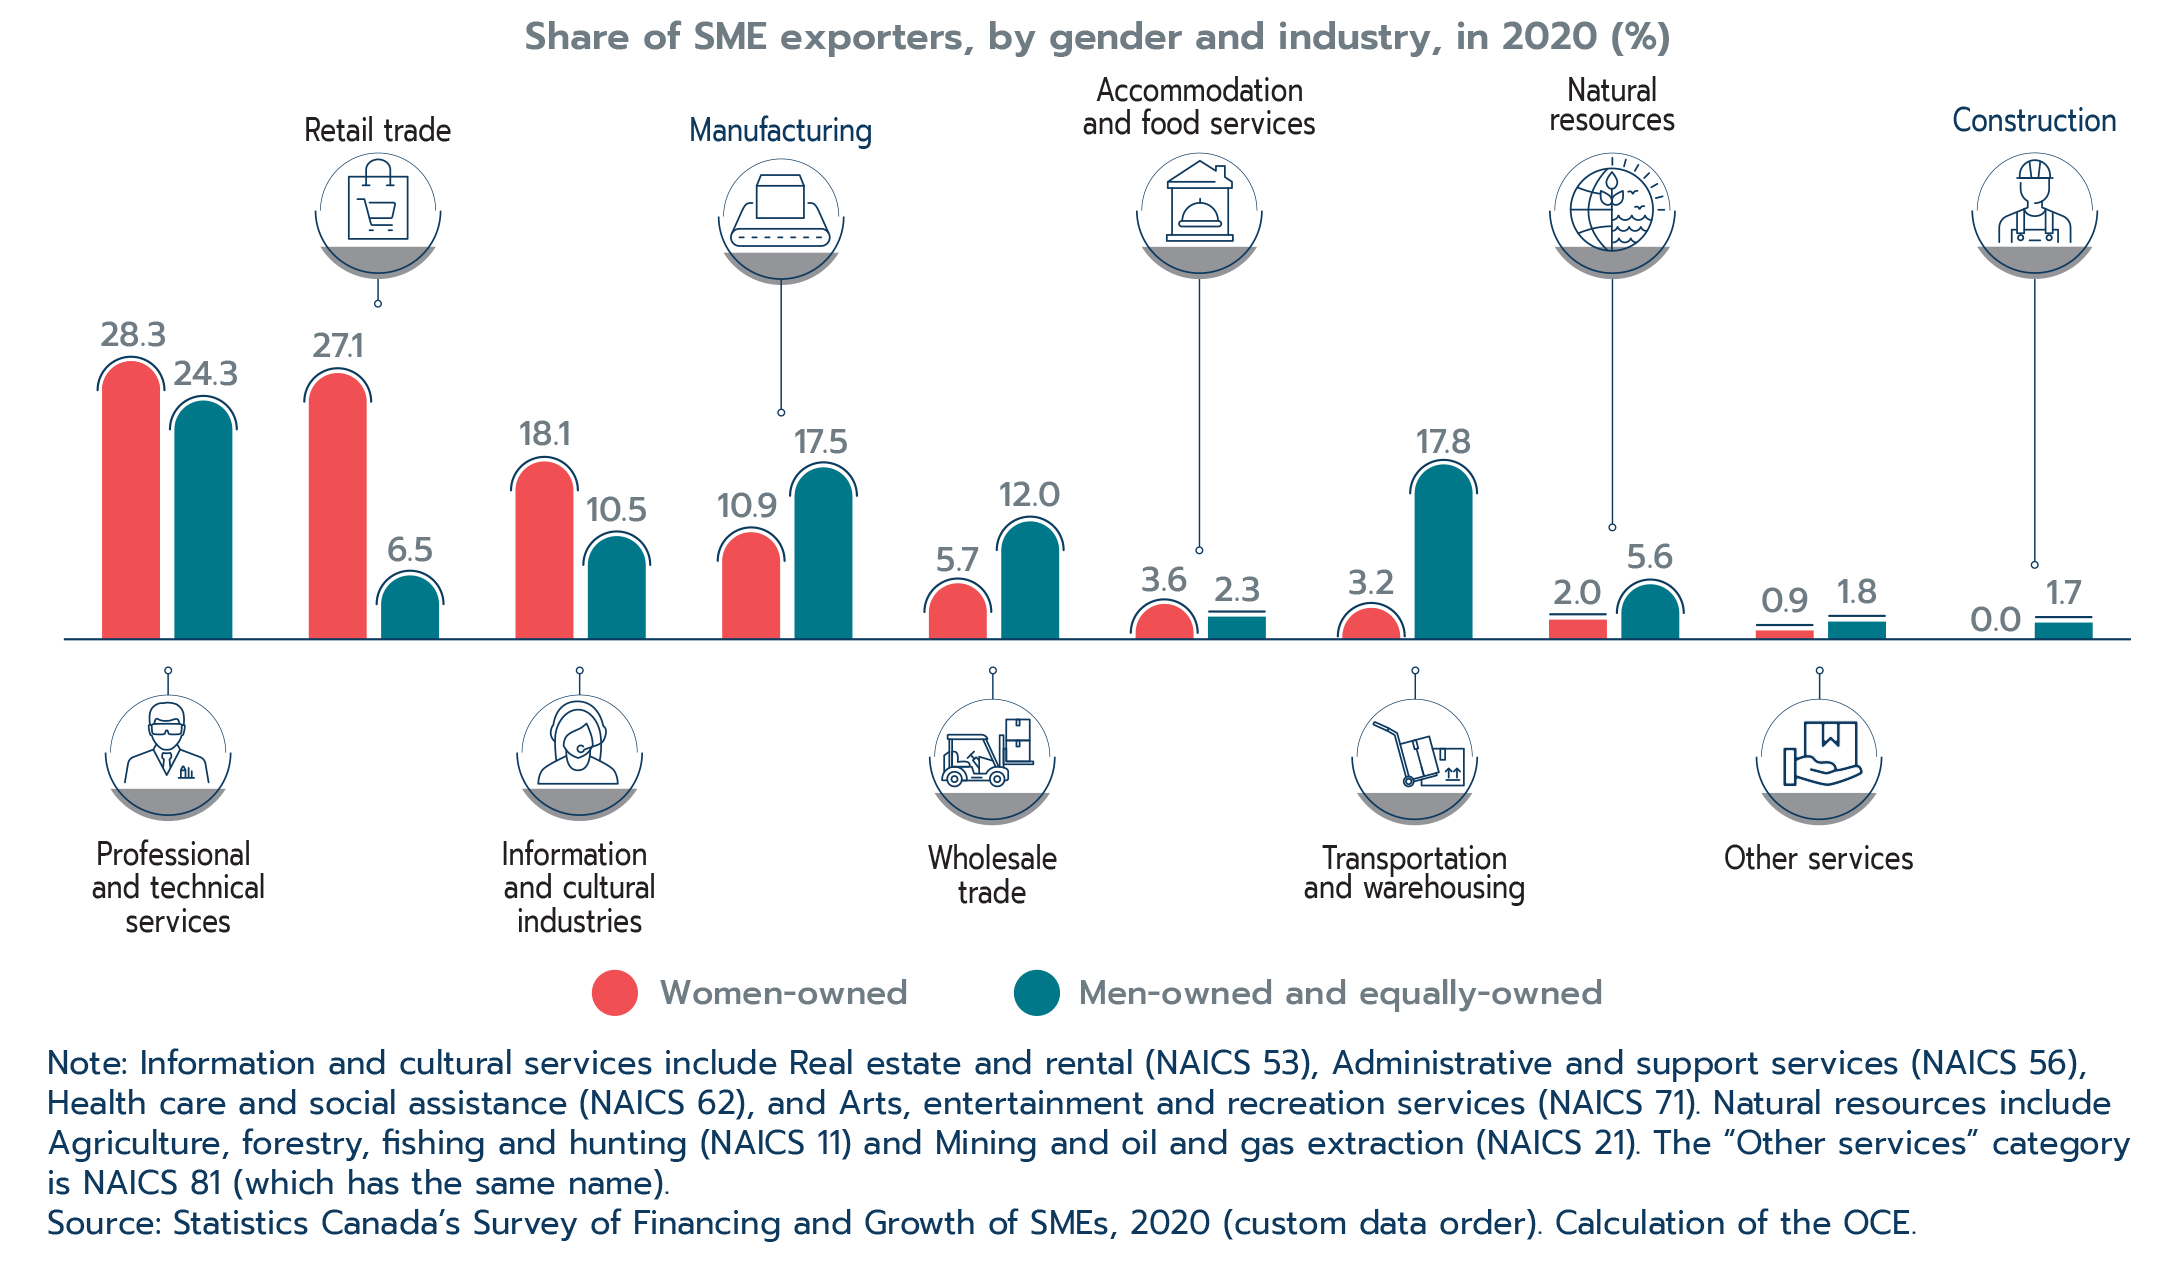 Figure 2.17: Women-owned SME exporters are more concentrated in services